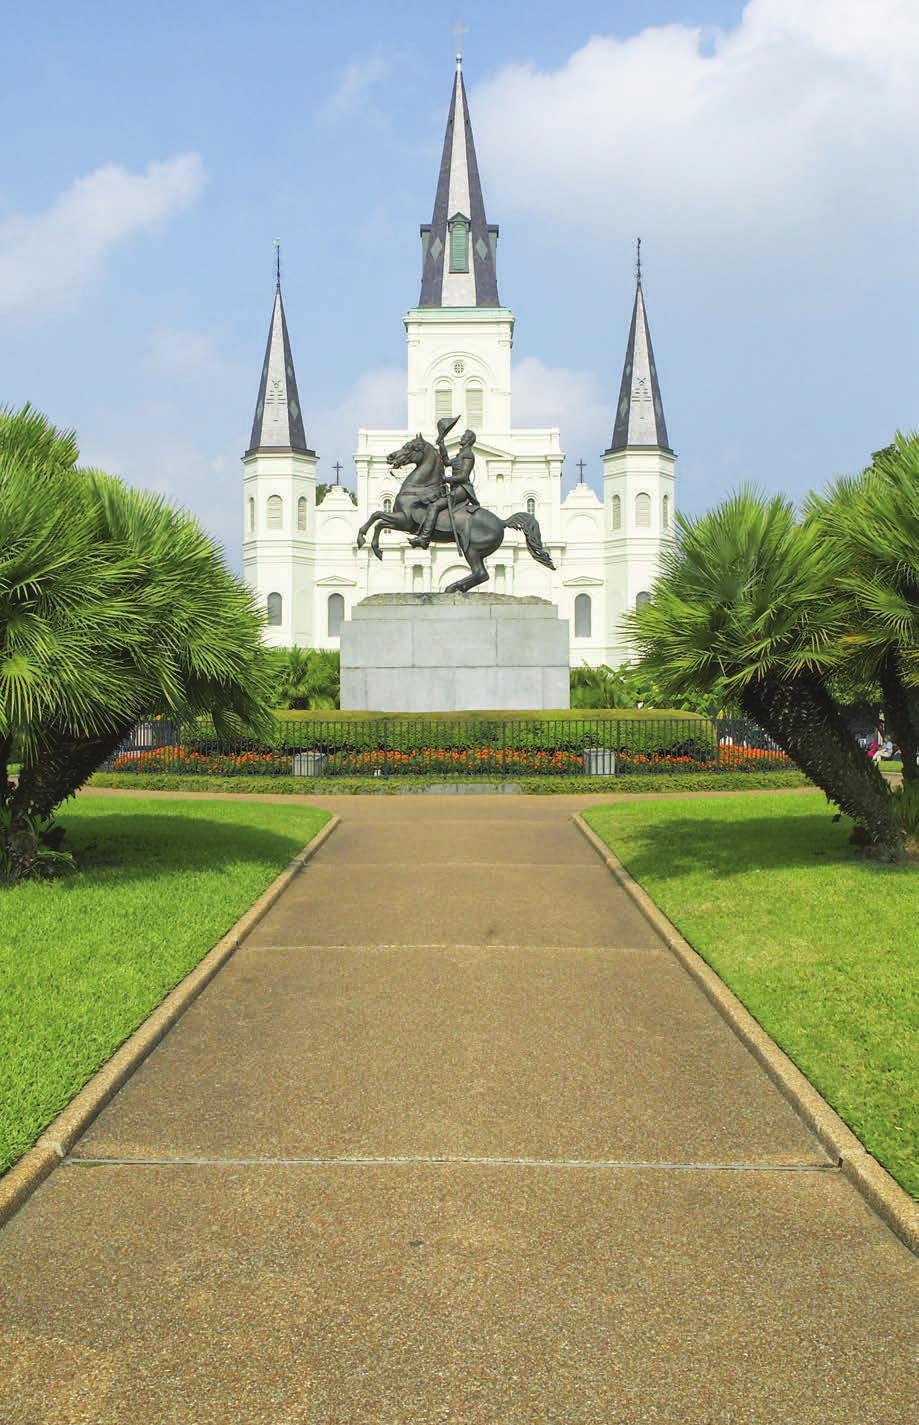 St. Louis Cathedral Book today!